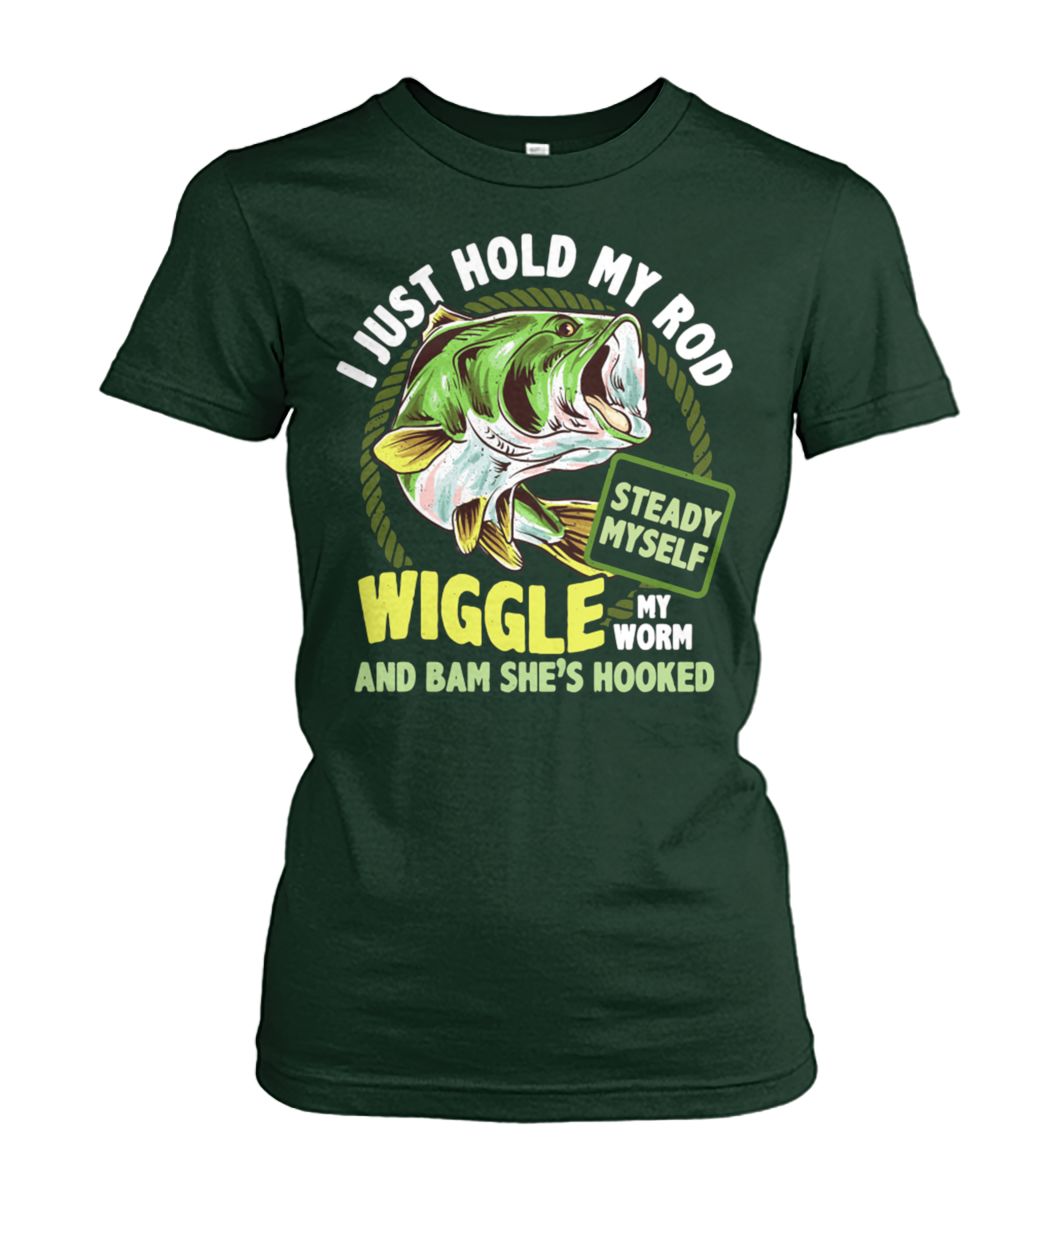 Fishing I just hold my rod steady myself wiggle my worm and bam she’s hooked women's crew tee